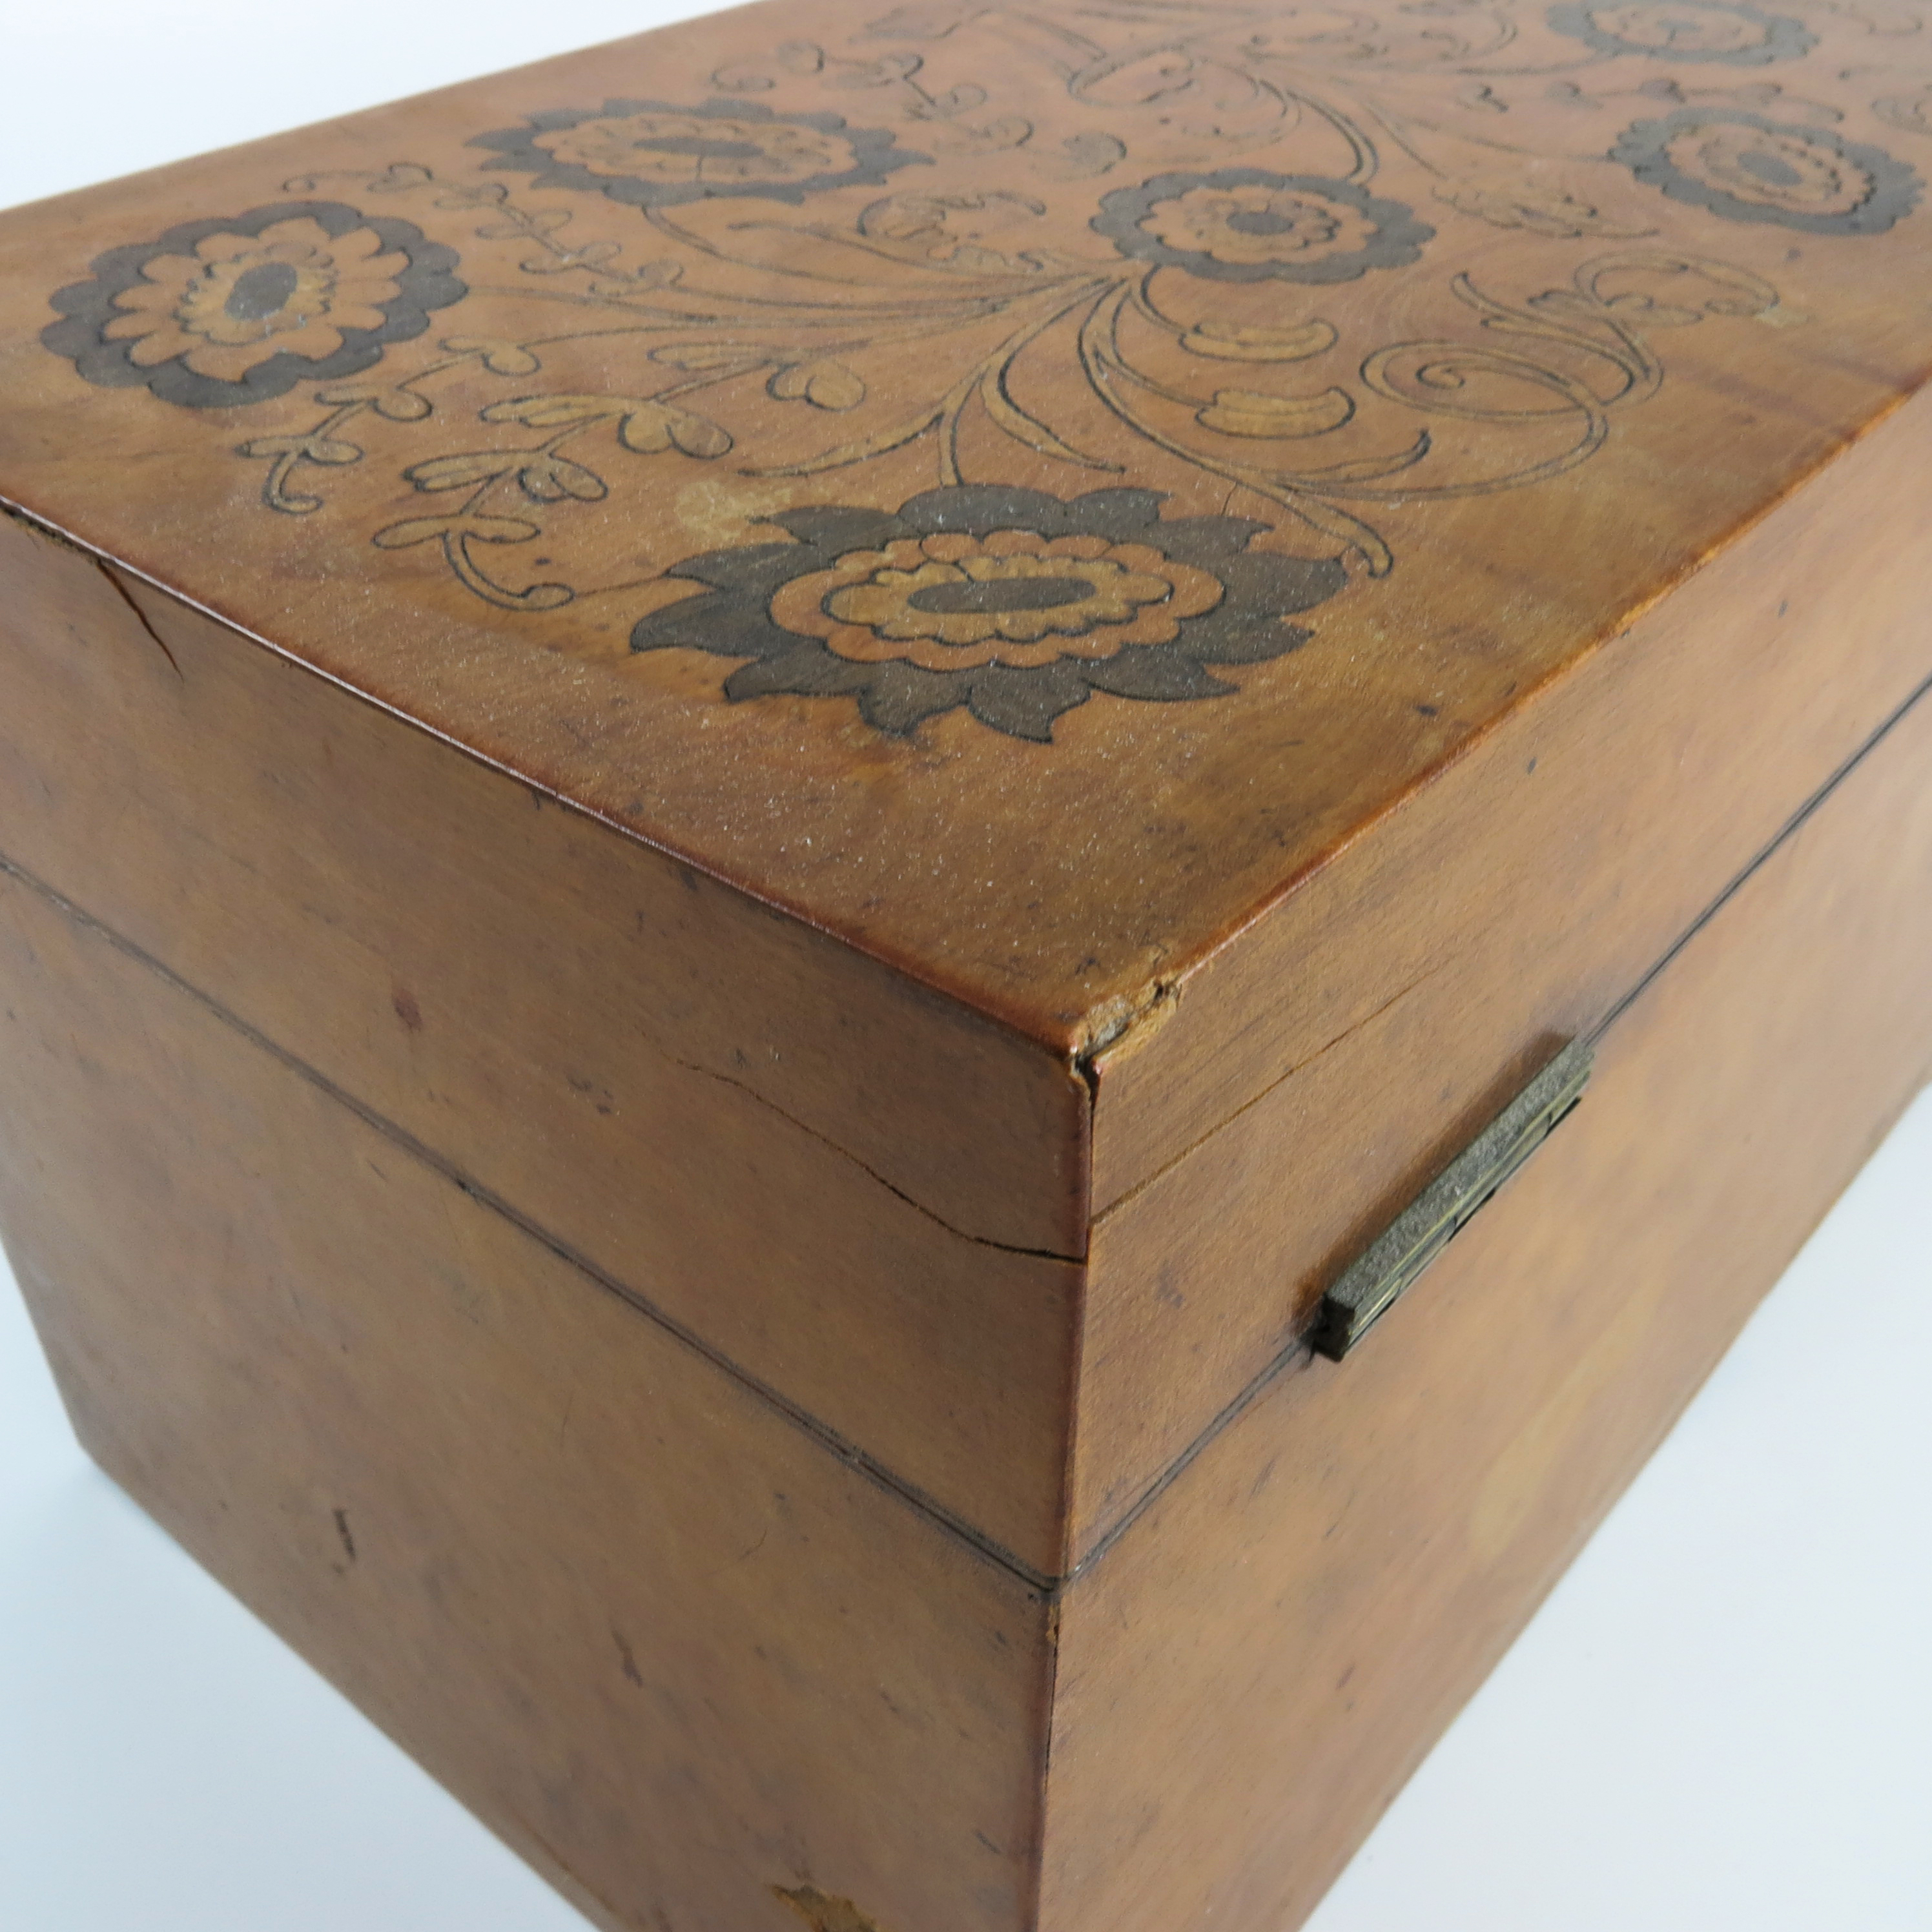 TEA CADDY WITH FLORAL POKER WORK DECORATION AND FITTED INTERIOR - Image 6 of 8